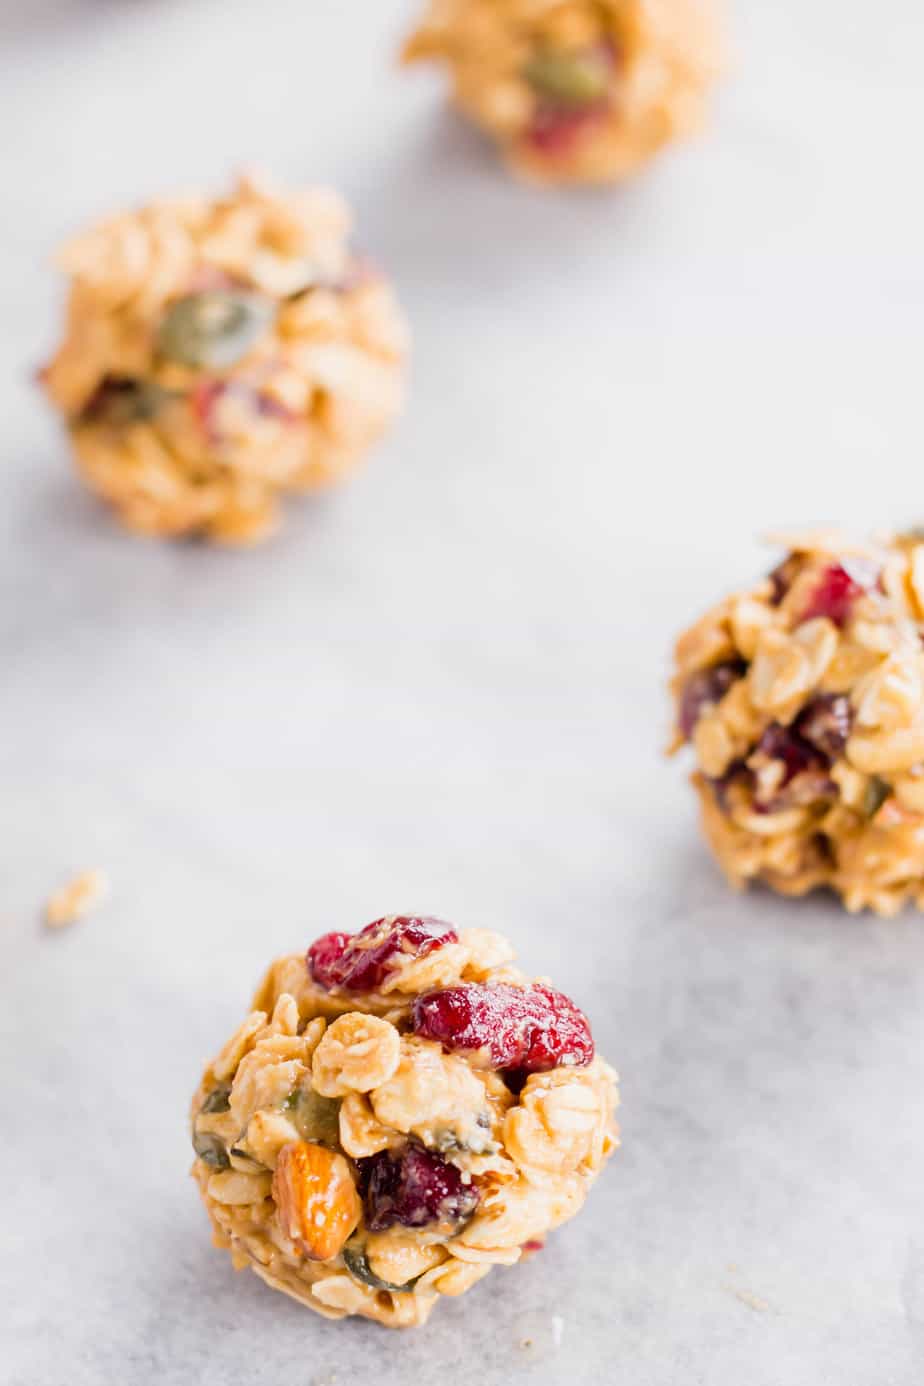 These Cranberry Nut Energy Balls are the perfect vegan, gluten-free snack. They require one bowl to make, are packed with protein and will satisfy that sweet tooth.